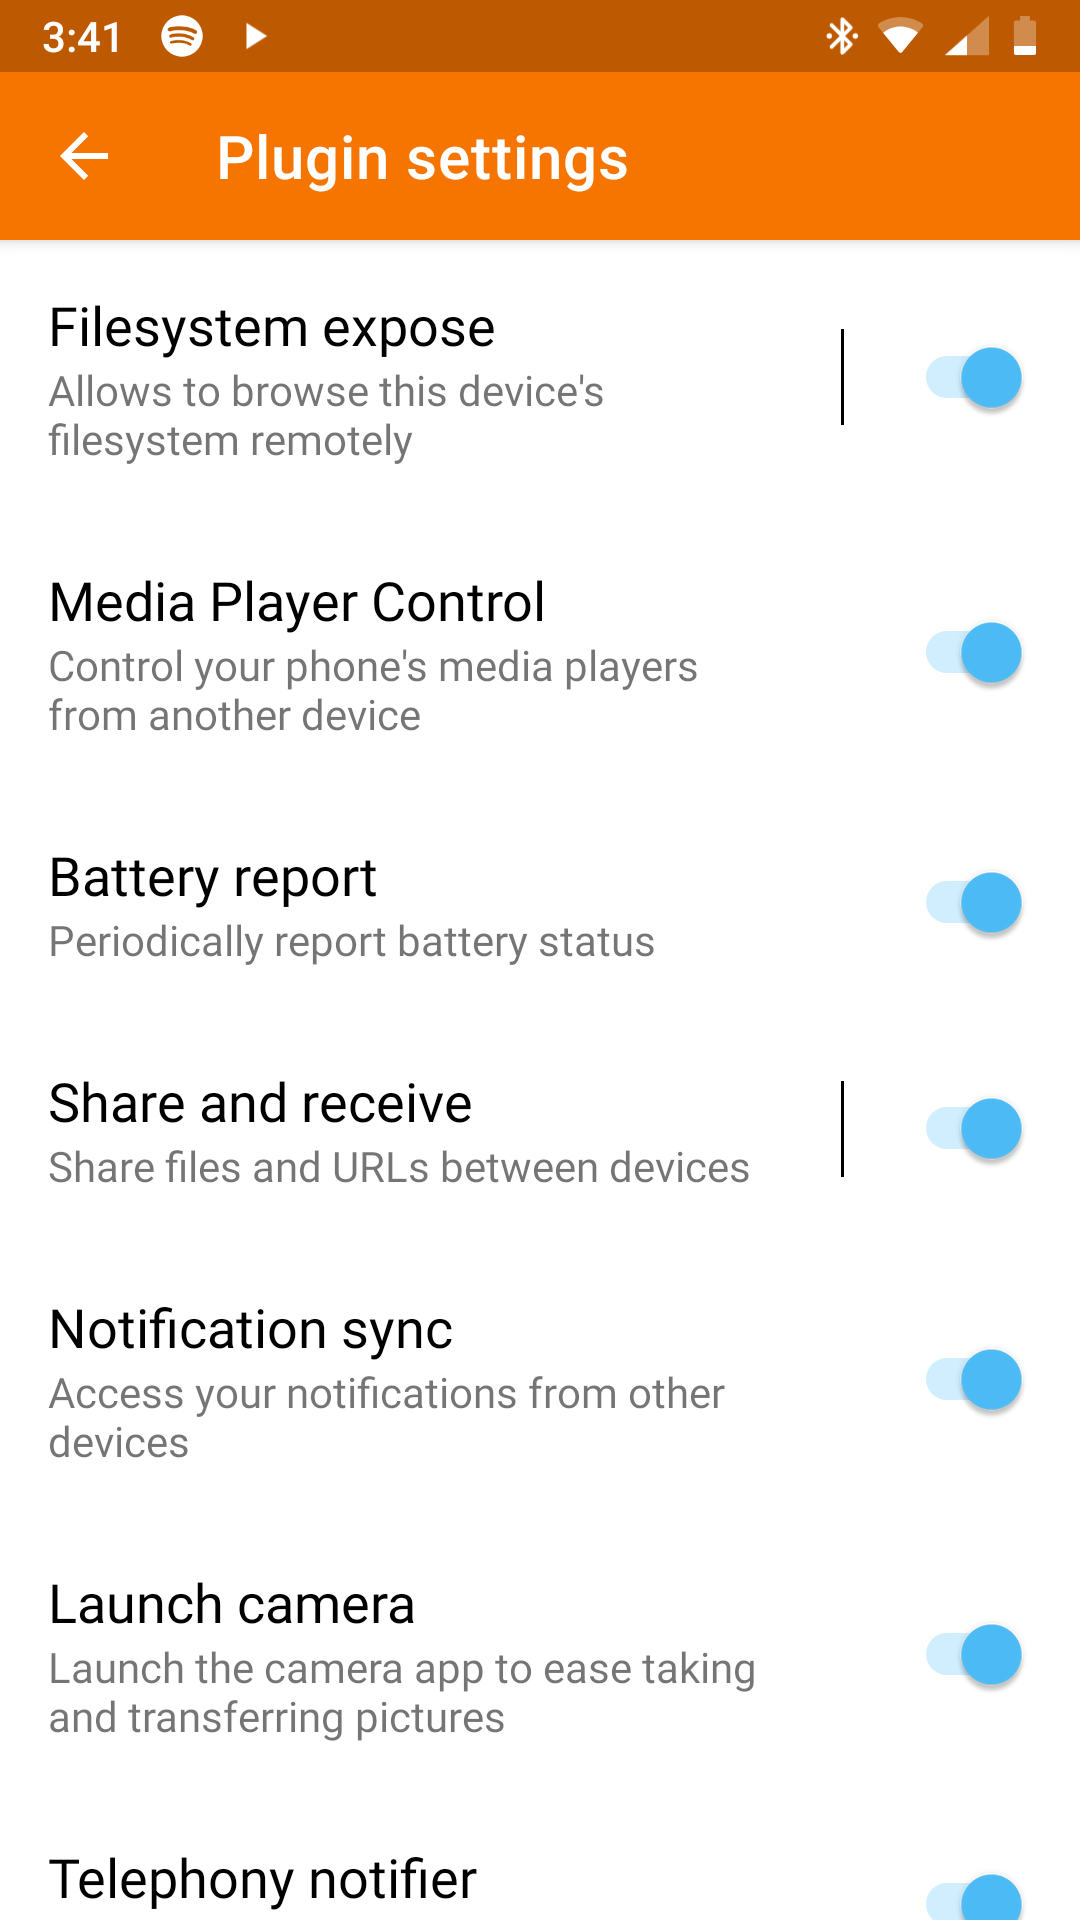 Plugin Settings in KDE Connect for Android